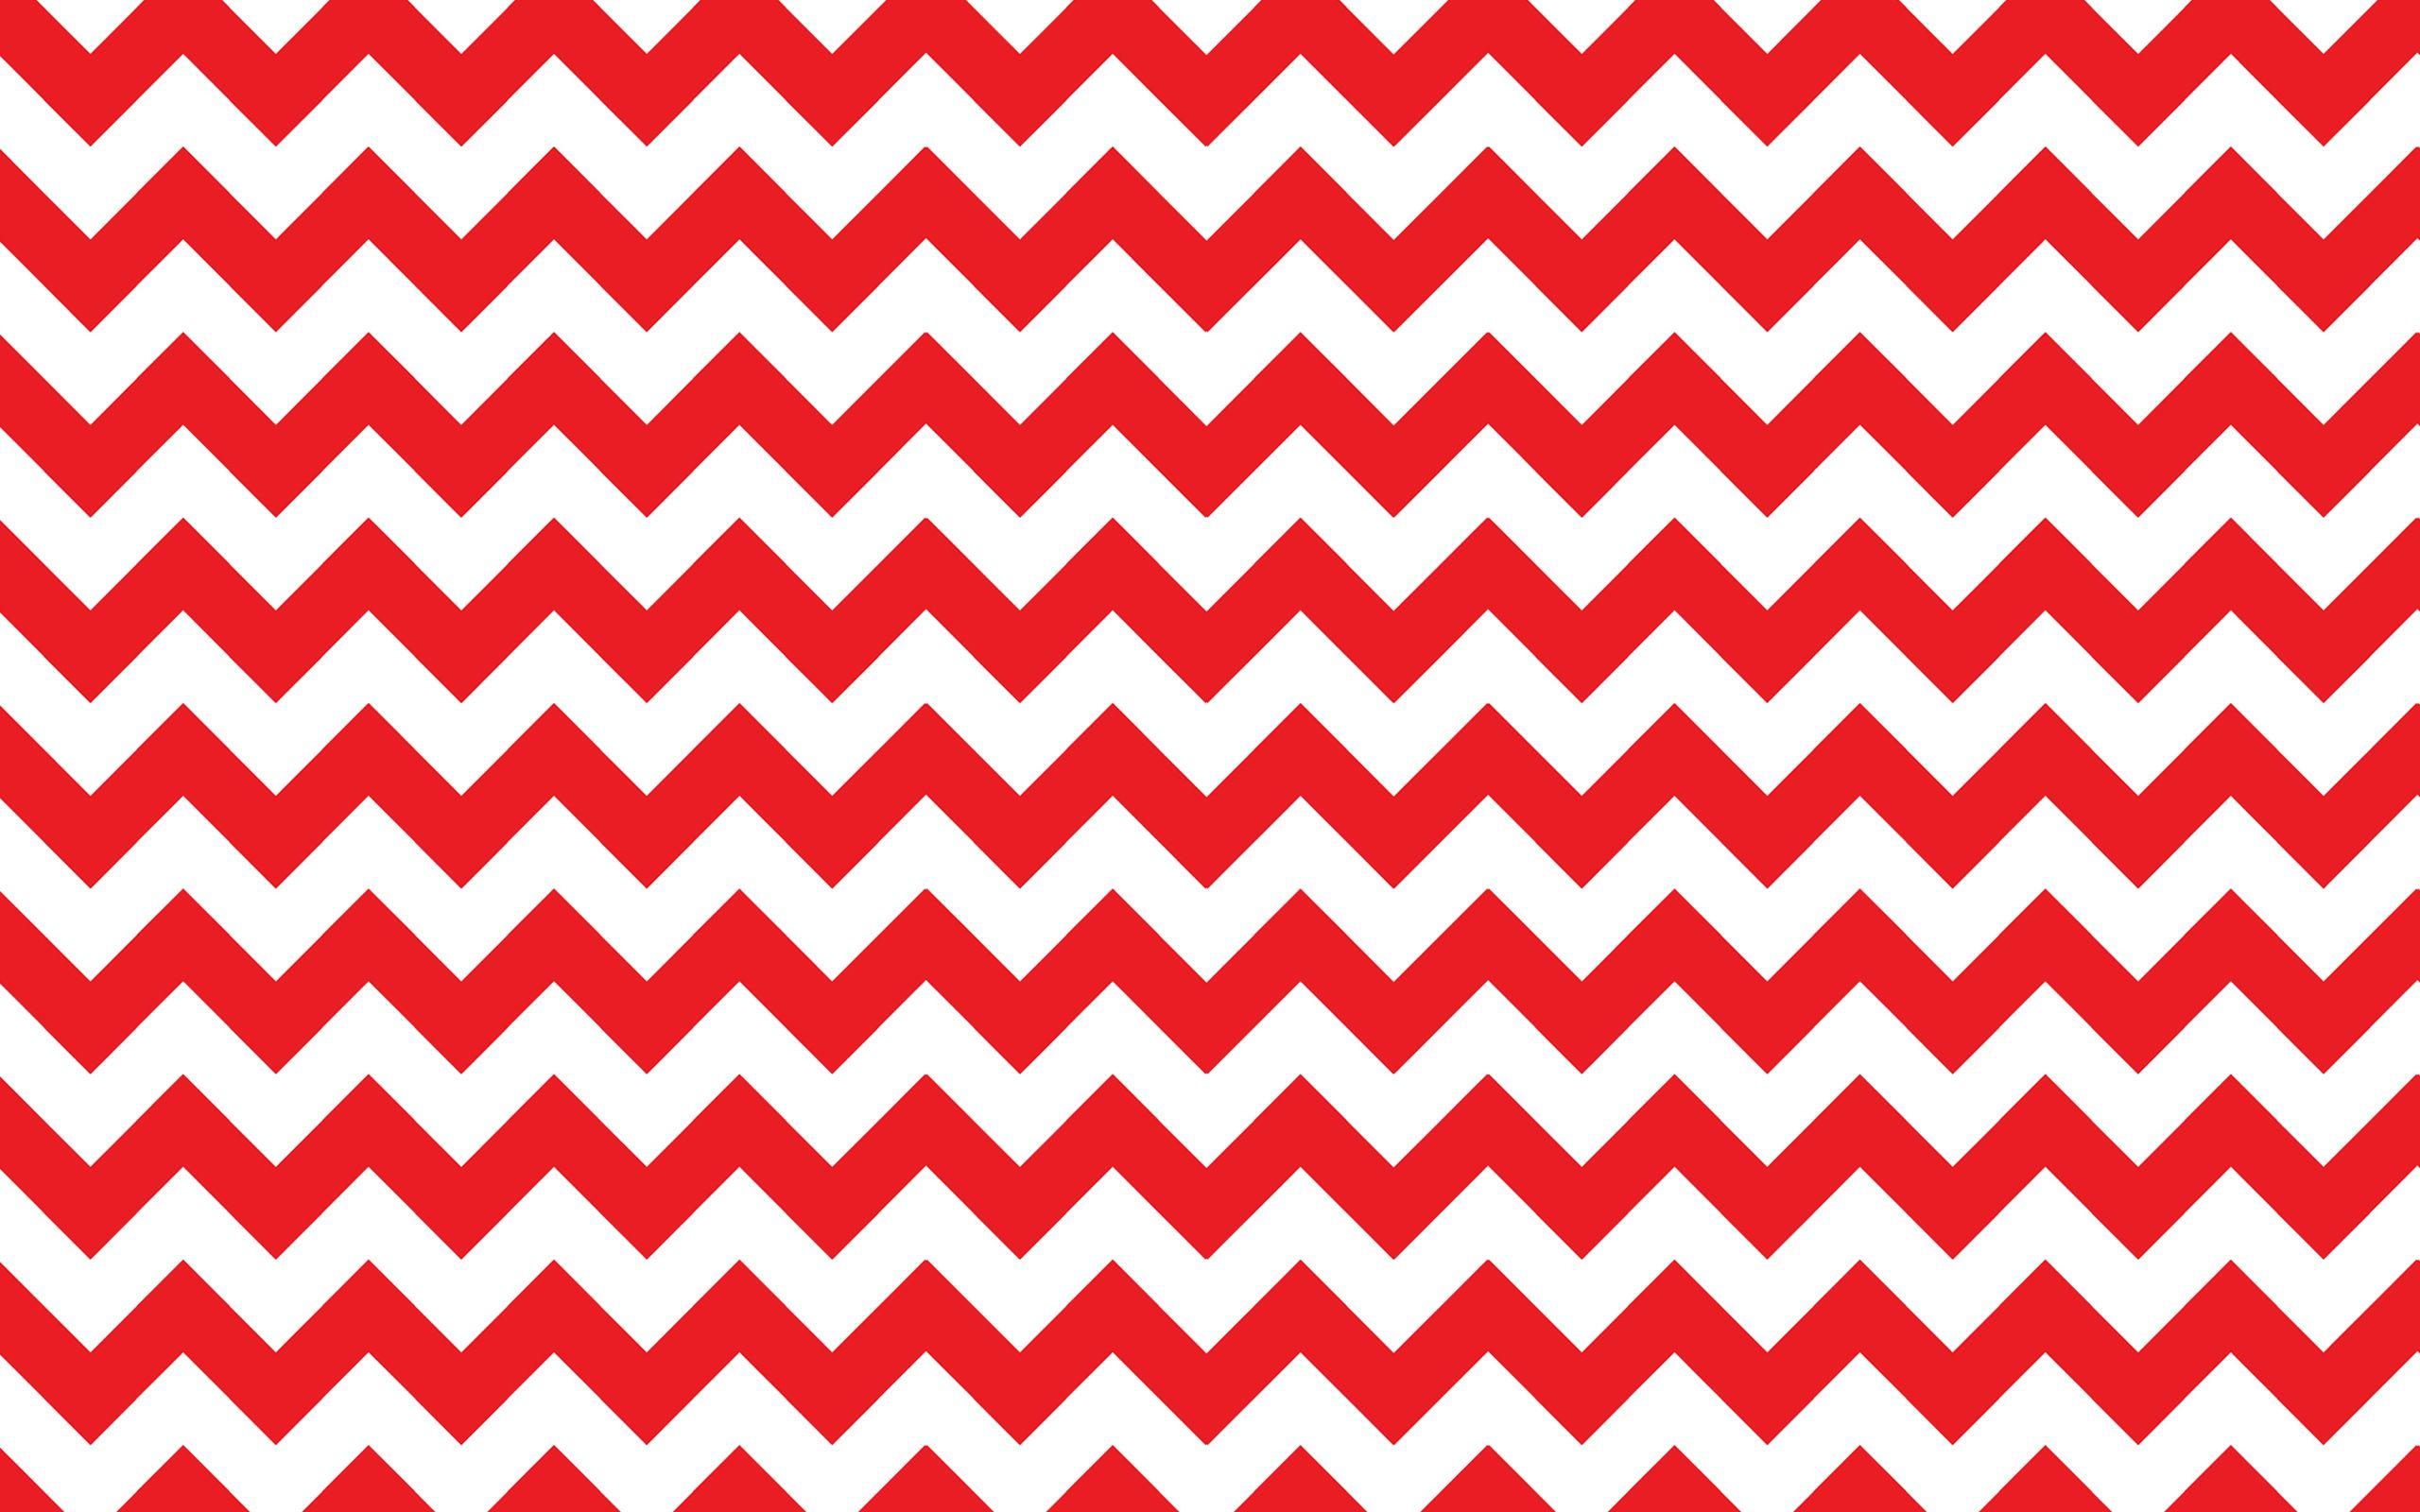 Red and White Zig Zag Background for Wallpaper. HD Wallpaper